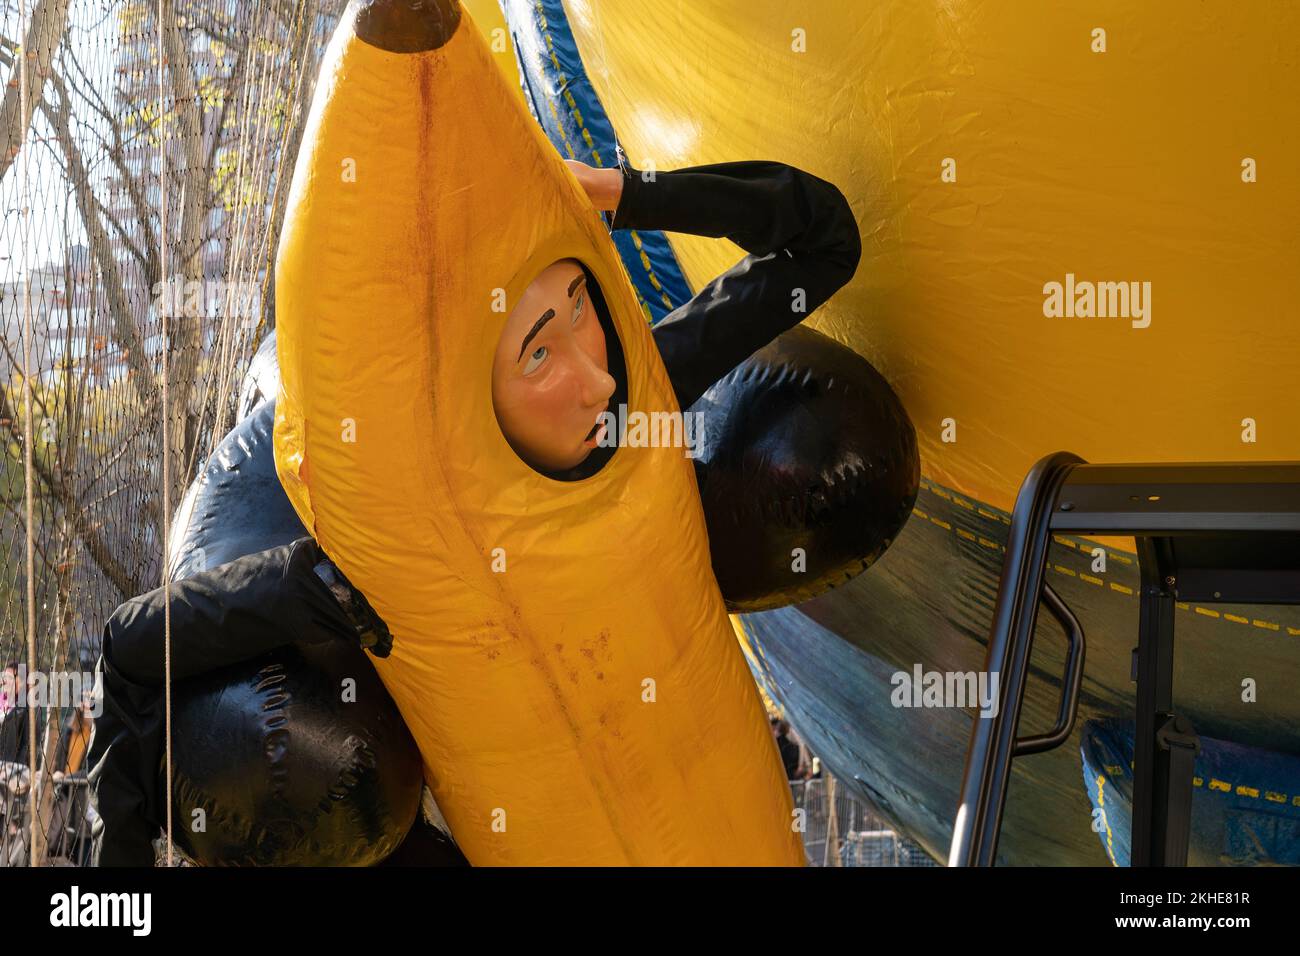 The Kevin the Minion balloon inflated for 96th Macy's Thanksgiving Day Parade on 77th street in New York on November 23, 2022 Stock Photo